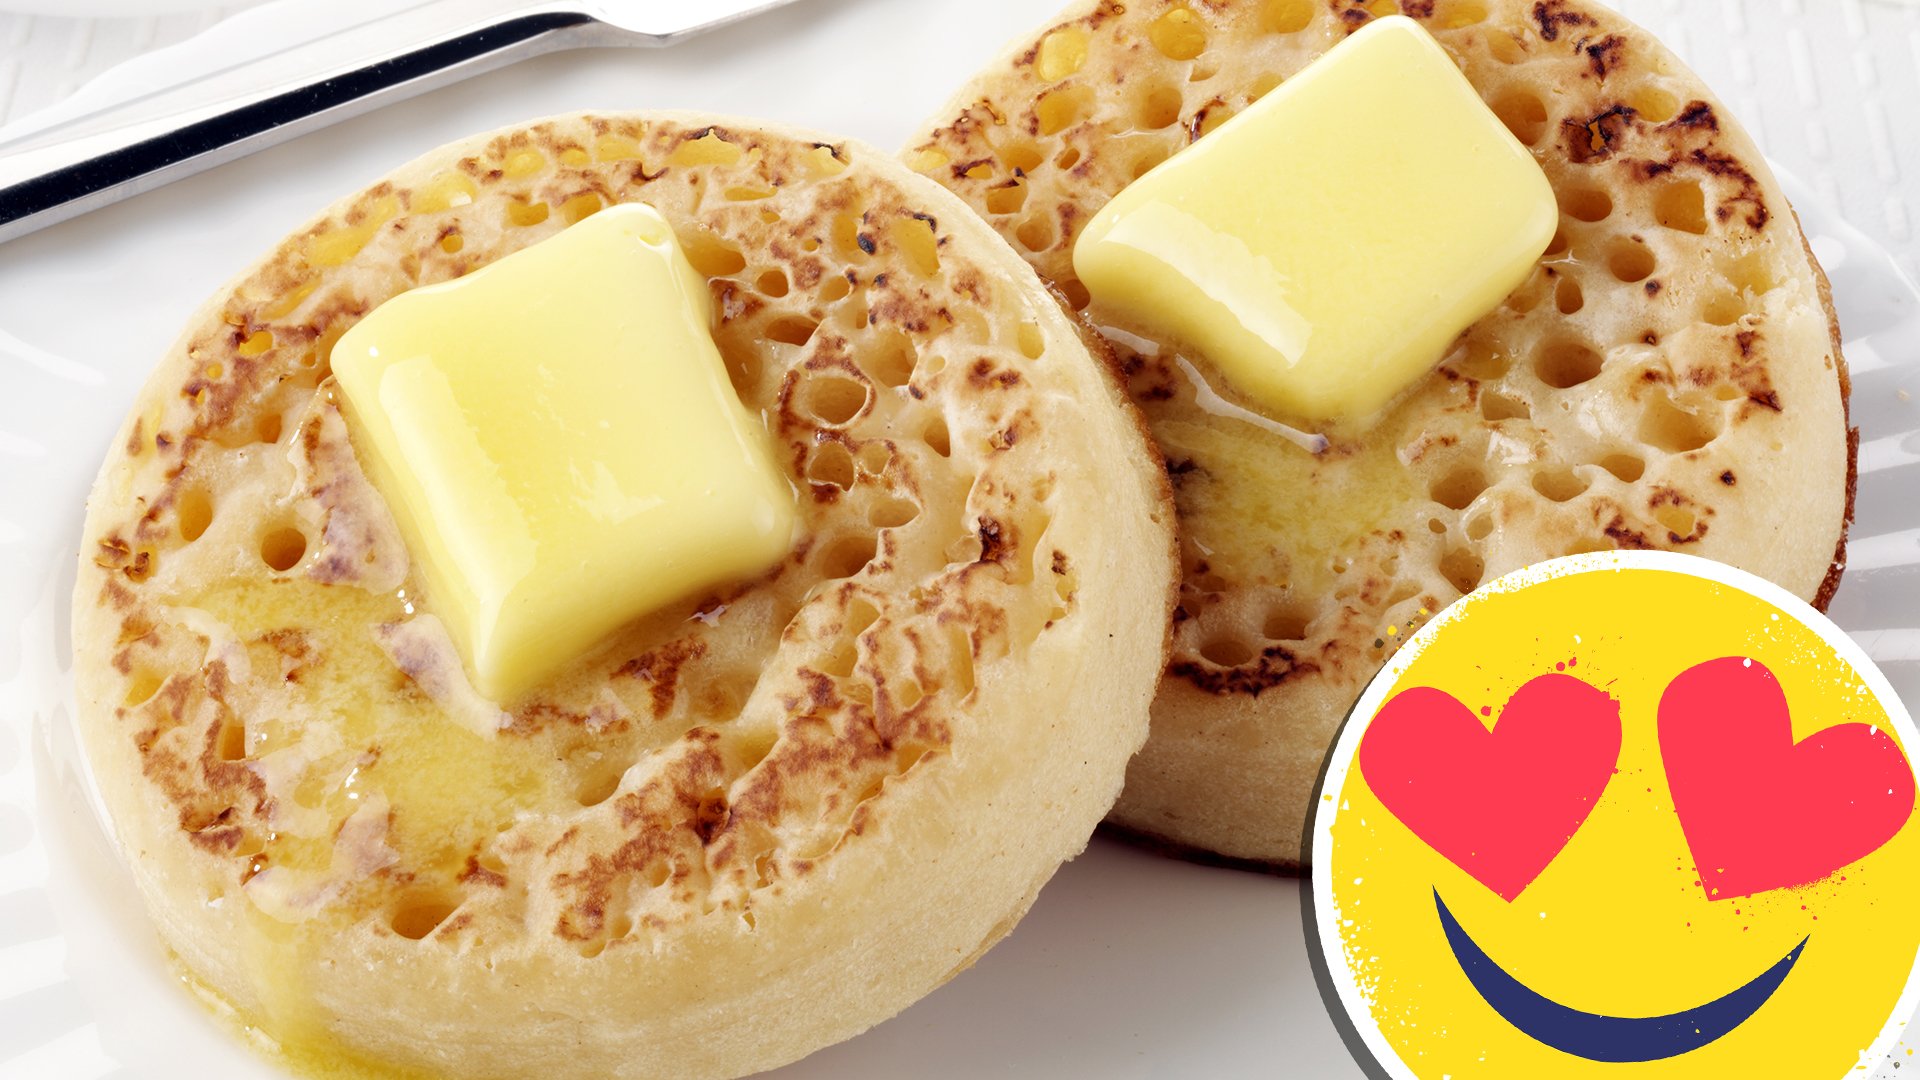 Buttered crumpets 